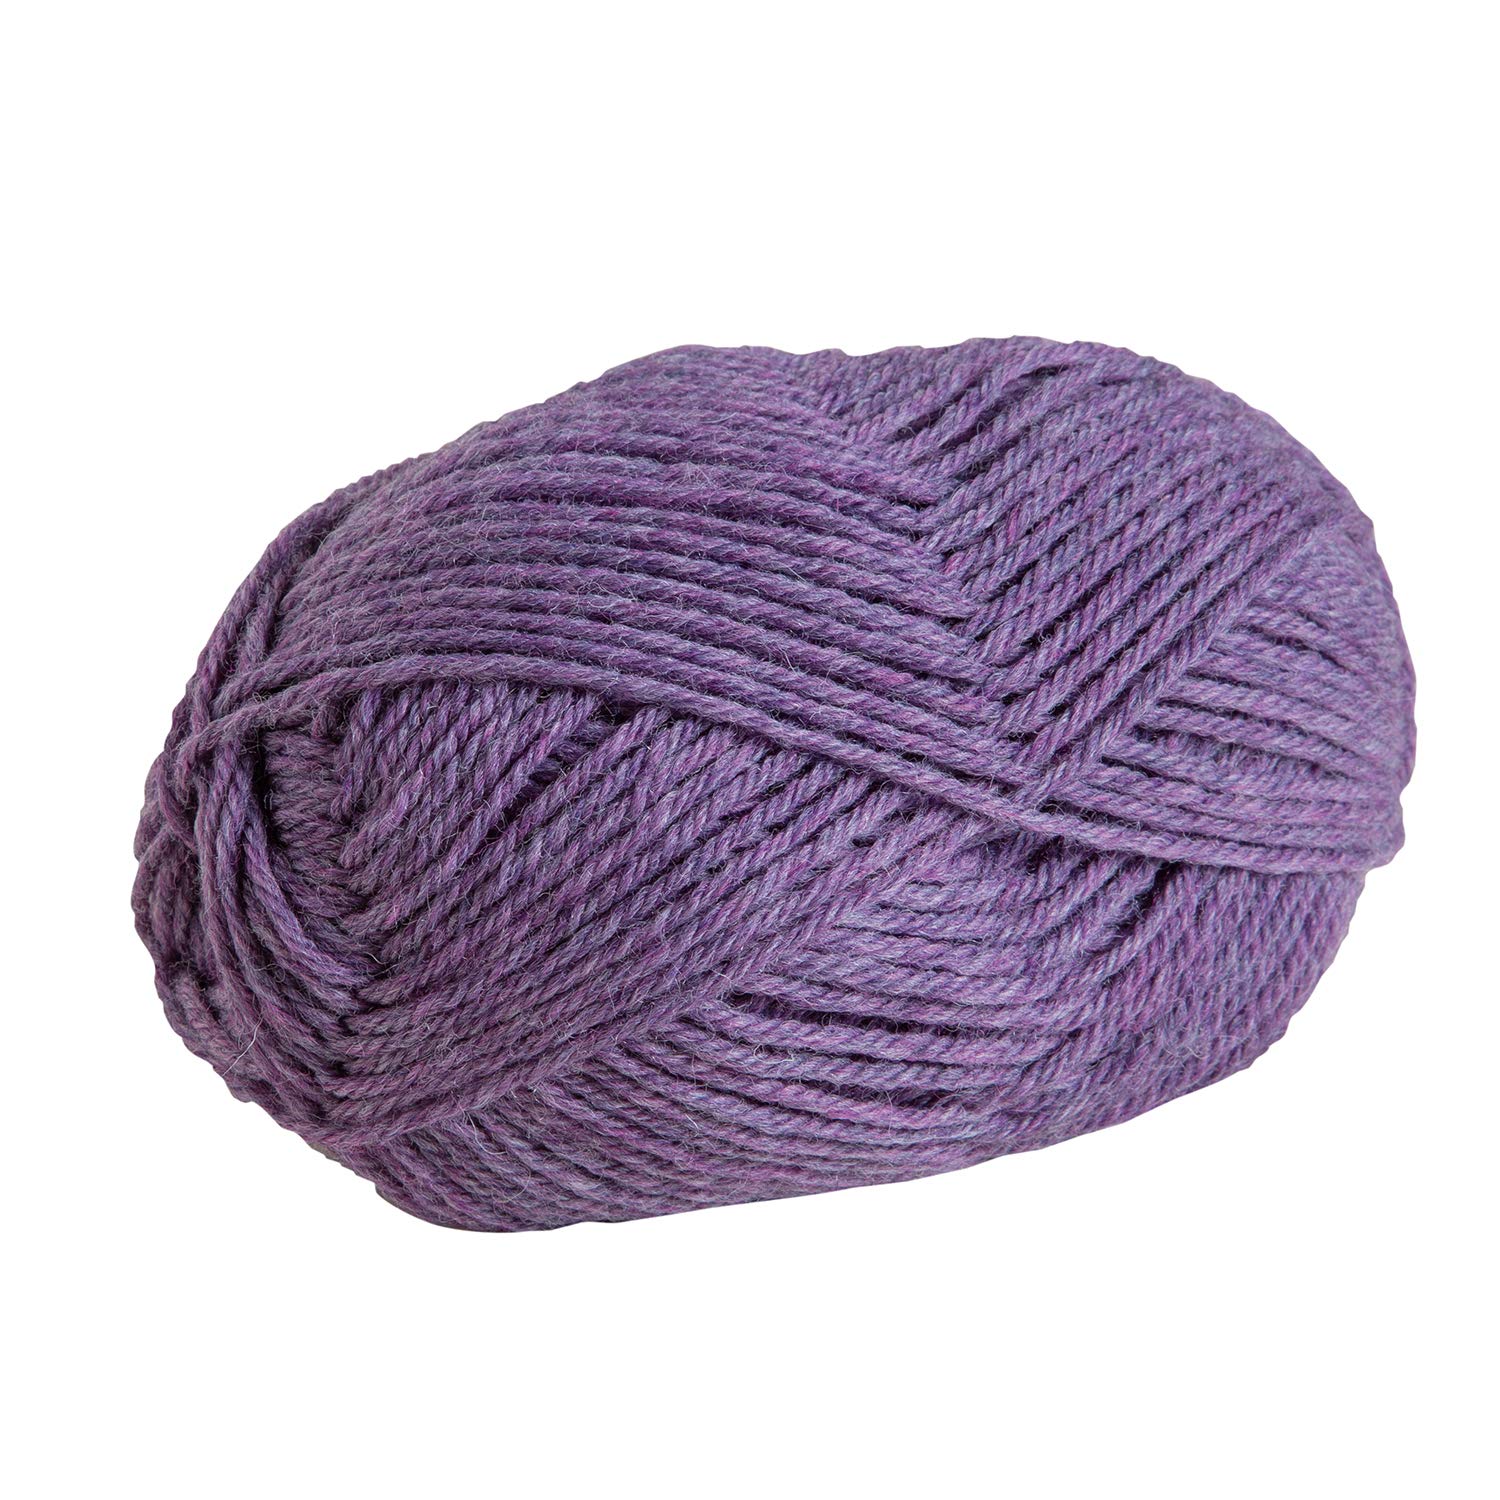 Knit Picks Wool of The Andes Worsted Weight 100% Wool Yarn Purple (1 Ball - Starling Heather)